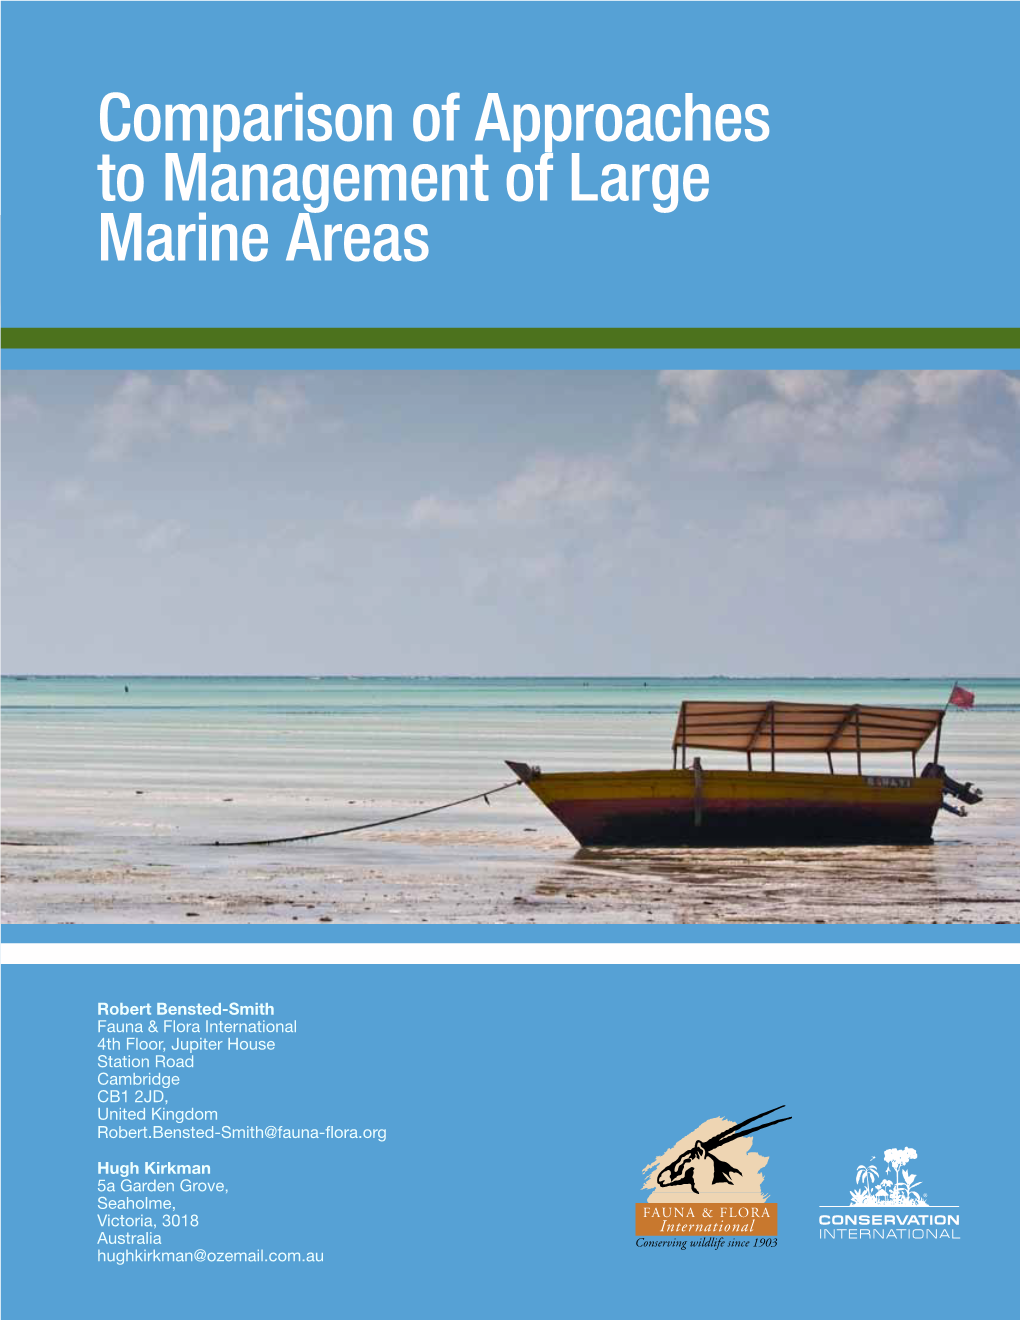 Comparison of Approaches to Management of Large Marine Areas